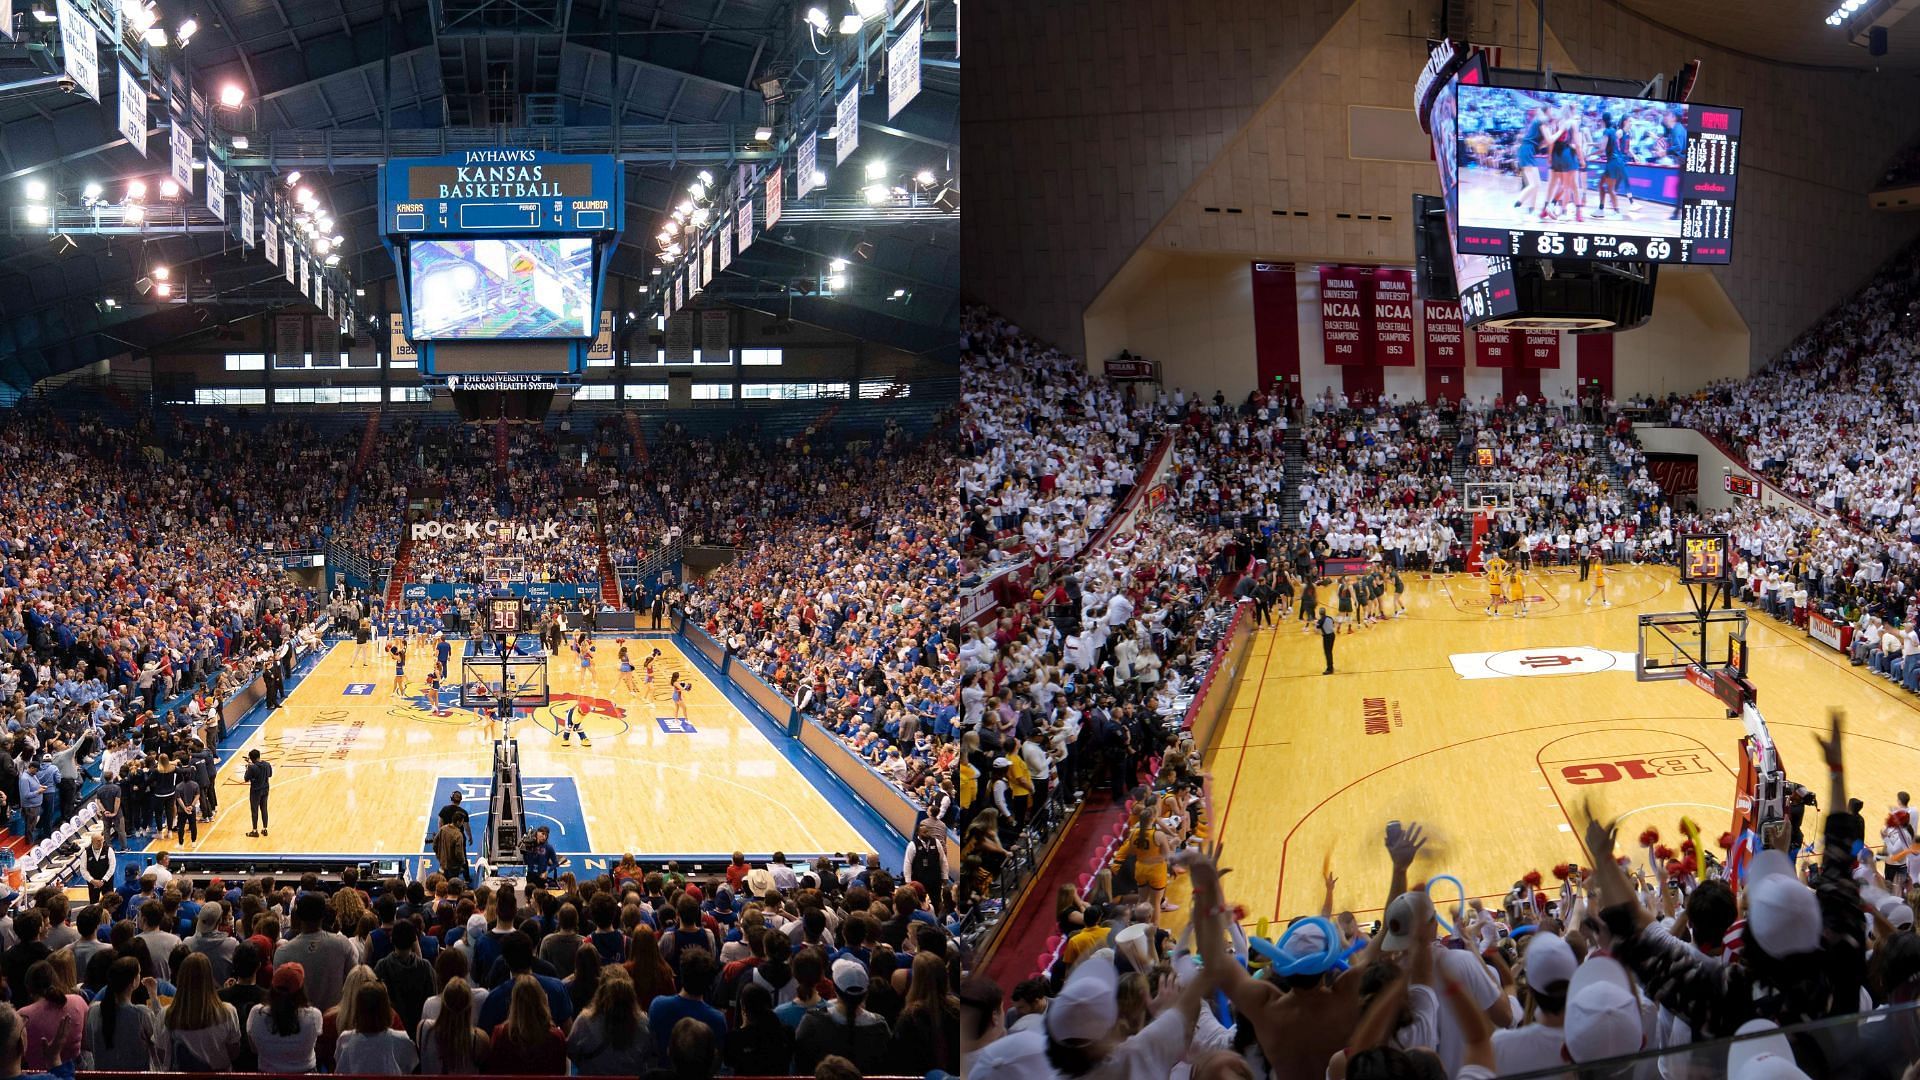 Allen Fieldhouse and Assembly Hall are among the toughest places to play in college basketball